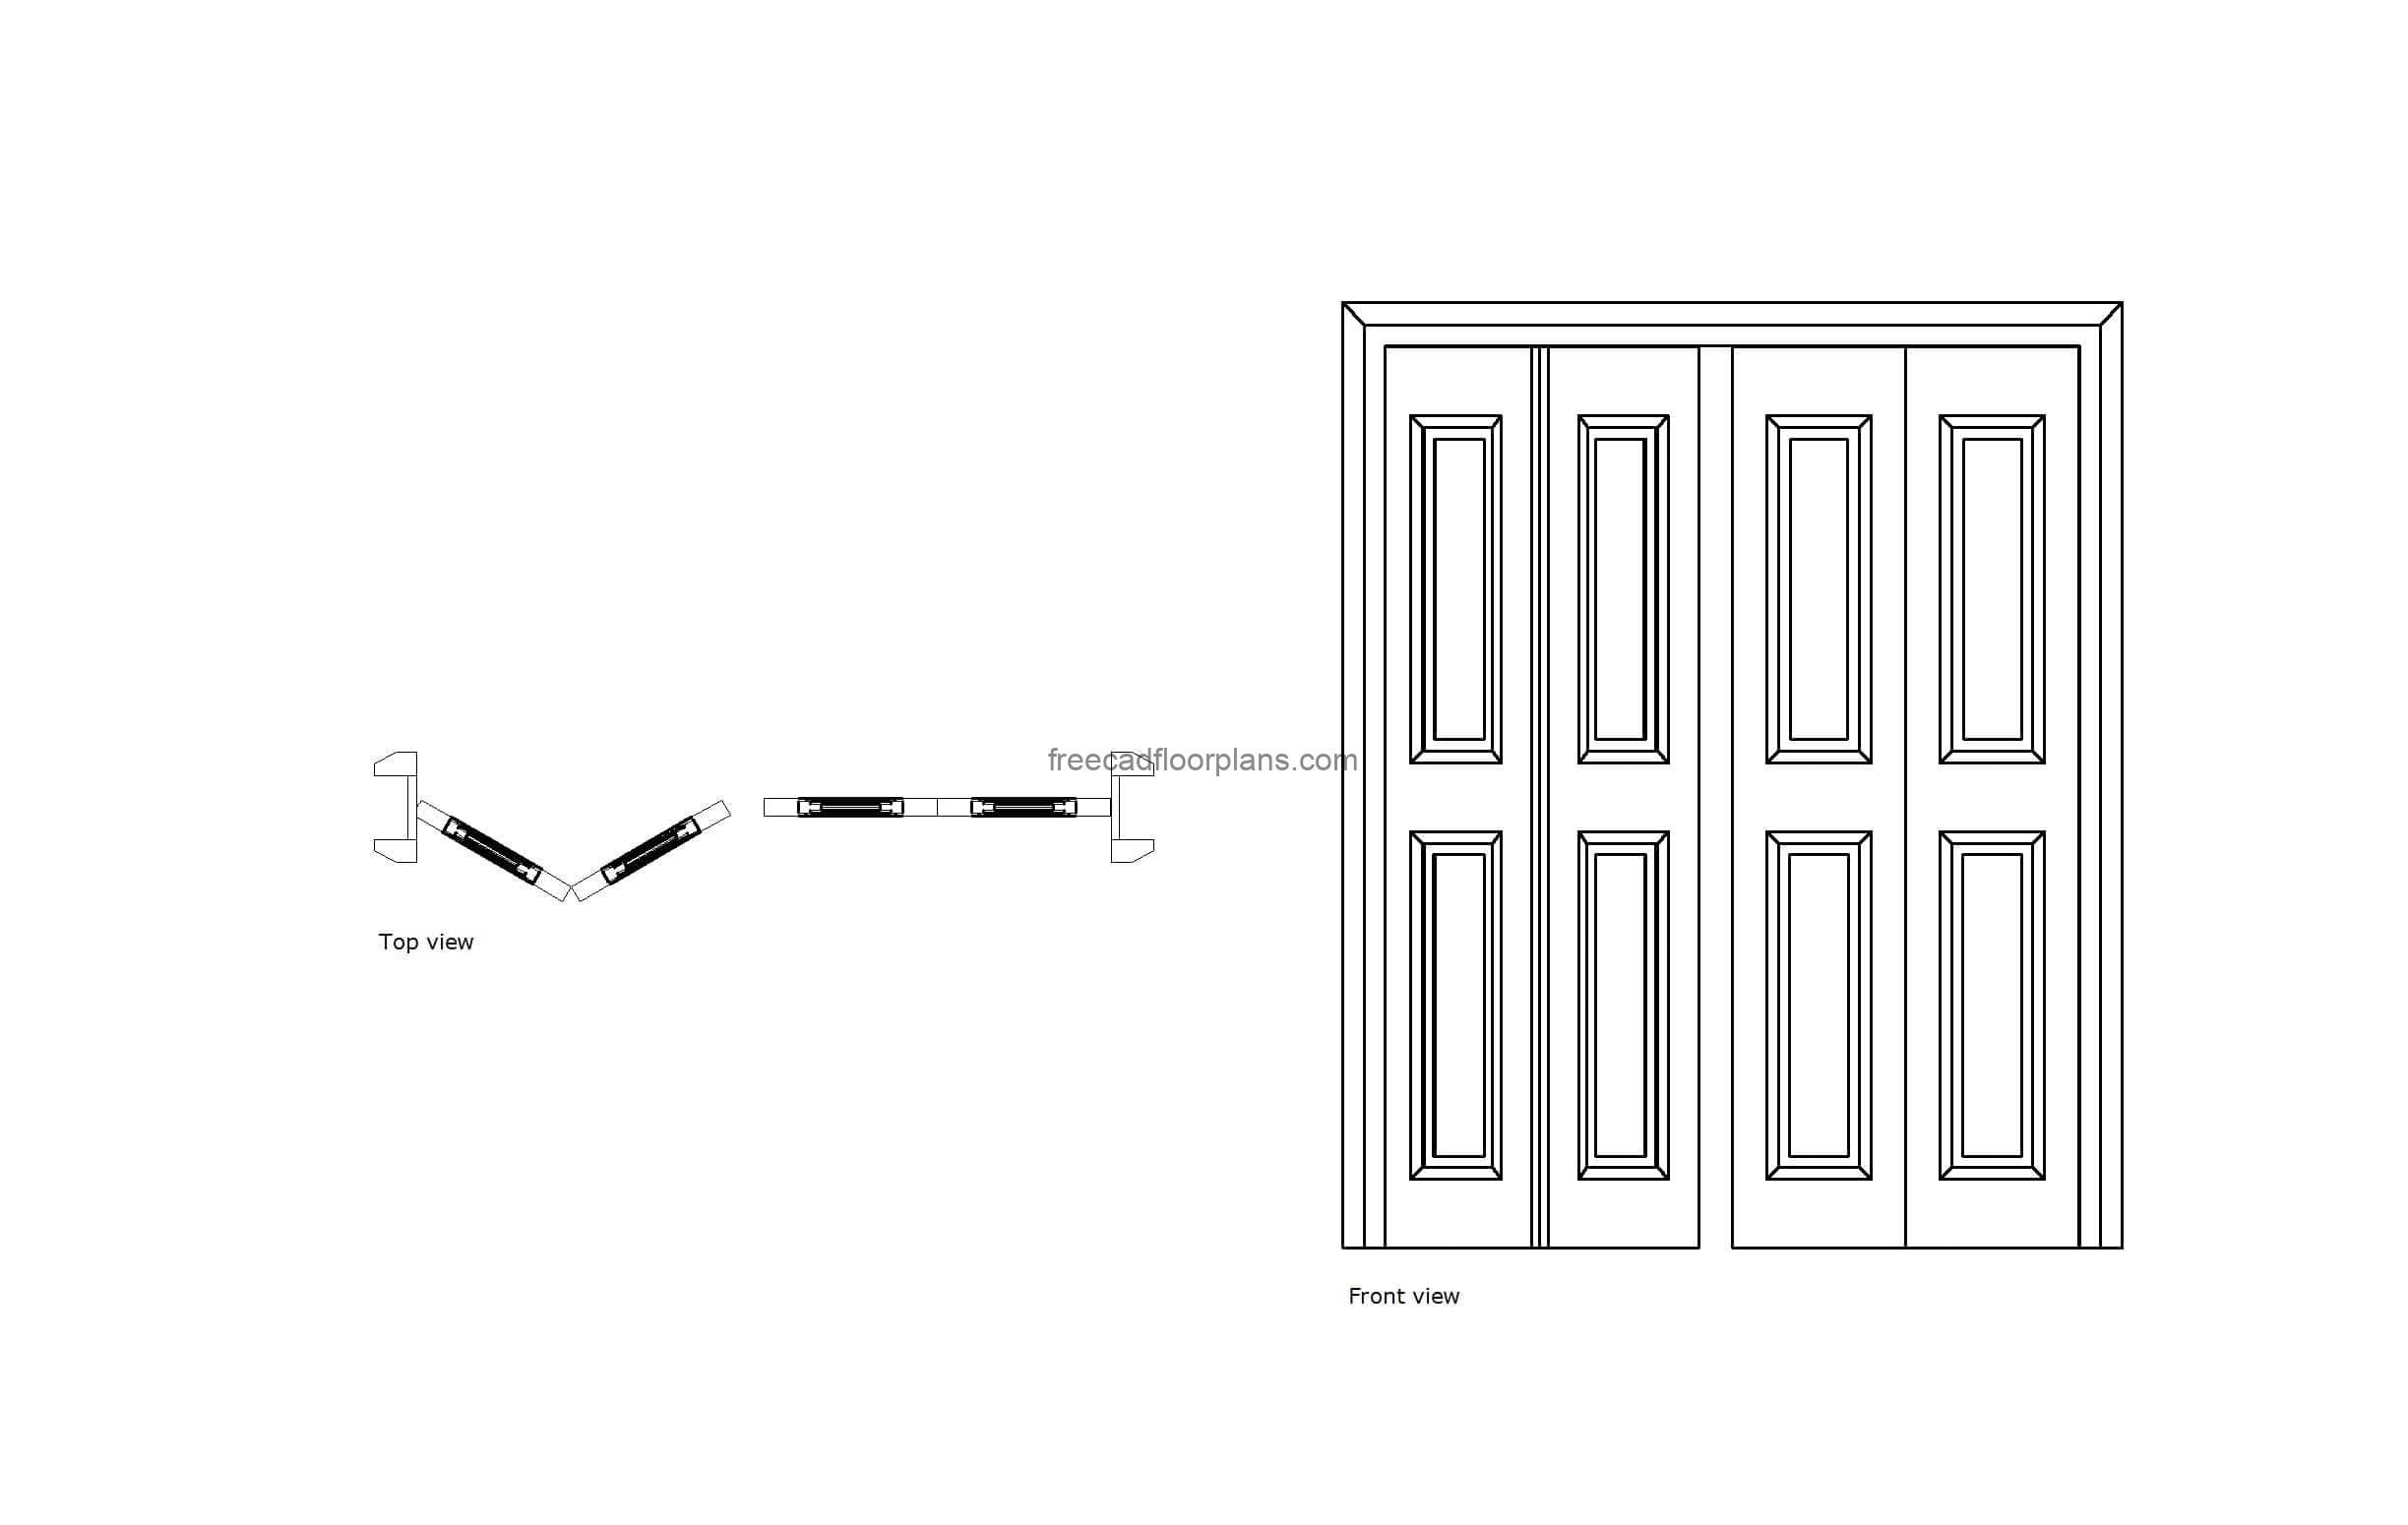 autocad drawing of a bi-fold closet door, plan and elevation 2d views, dwg file free for download